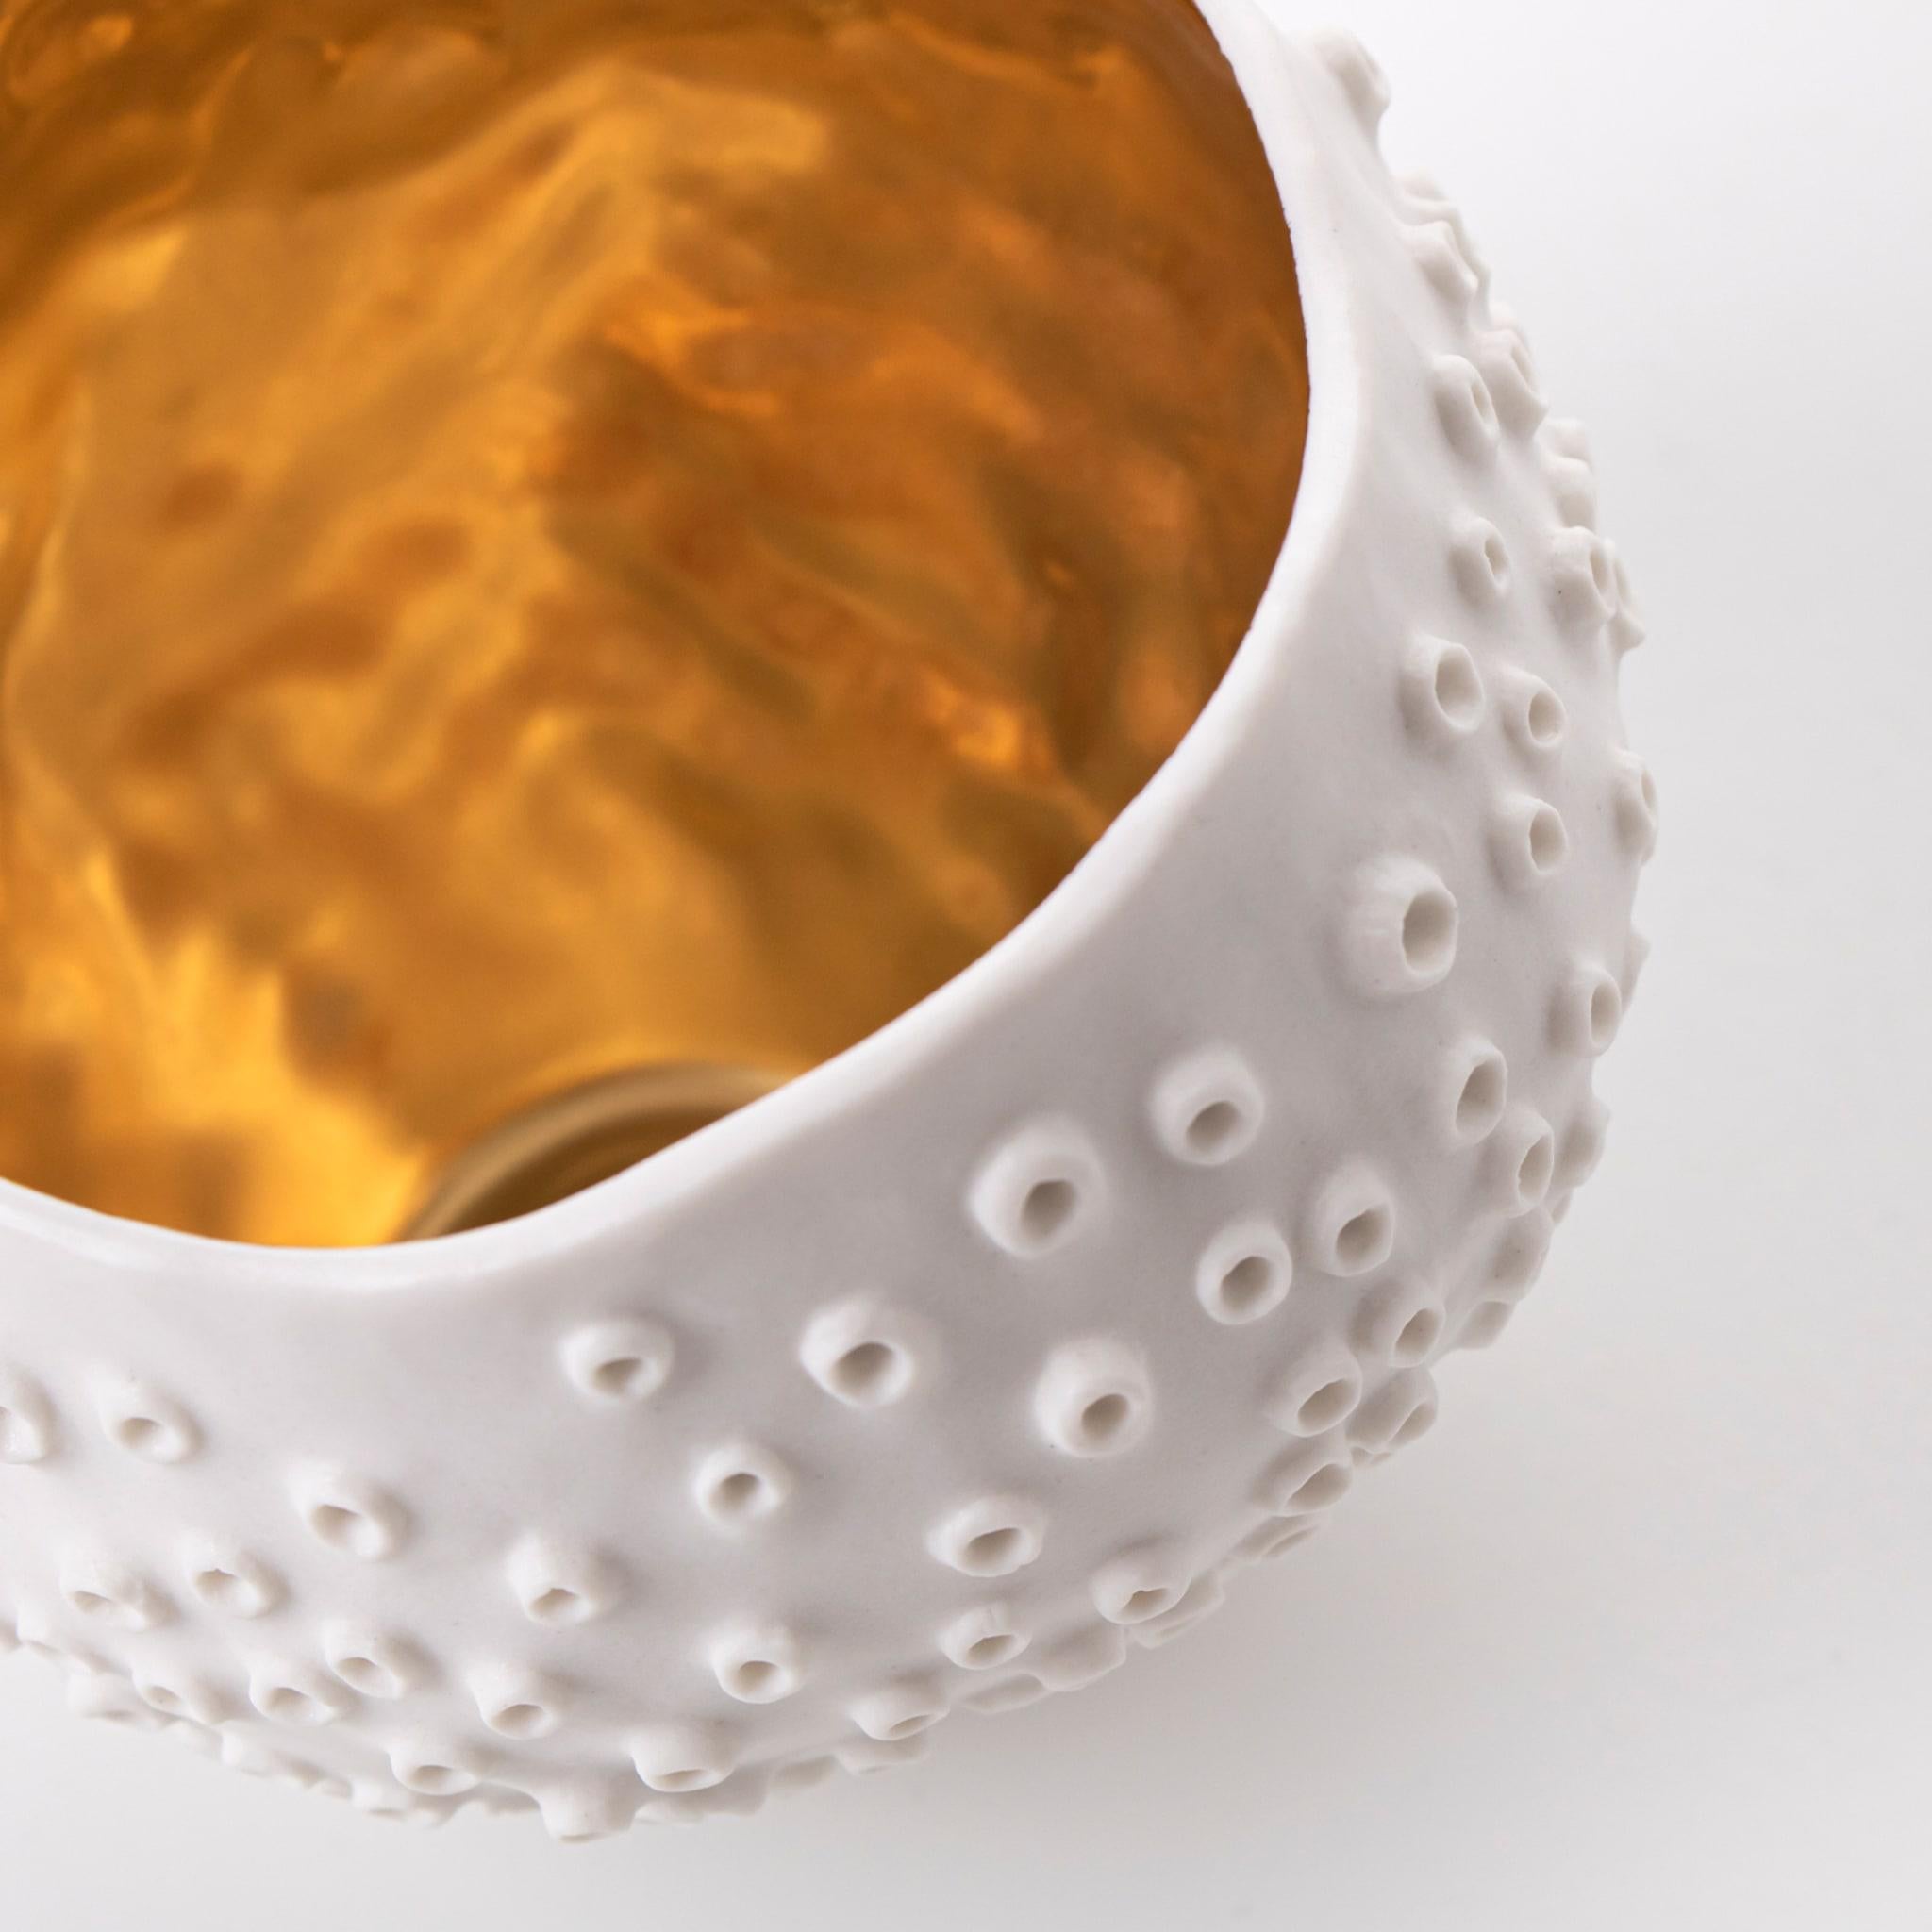 Inspired by the spectacular shapes and textures found in marine life, this delicate cup features a textured surface with tiny raised rings that evoke the exotic reef corals. Entirely handcrafted of white porcelain with a glossy finish, this